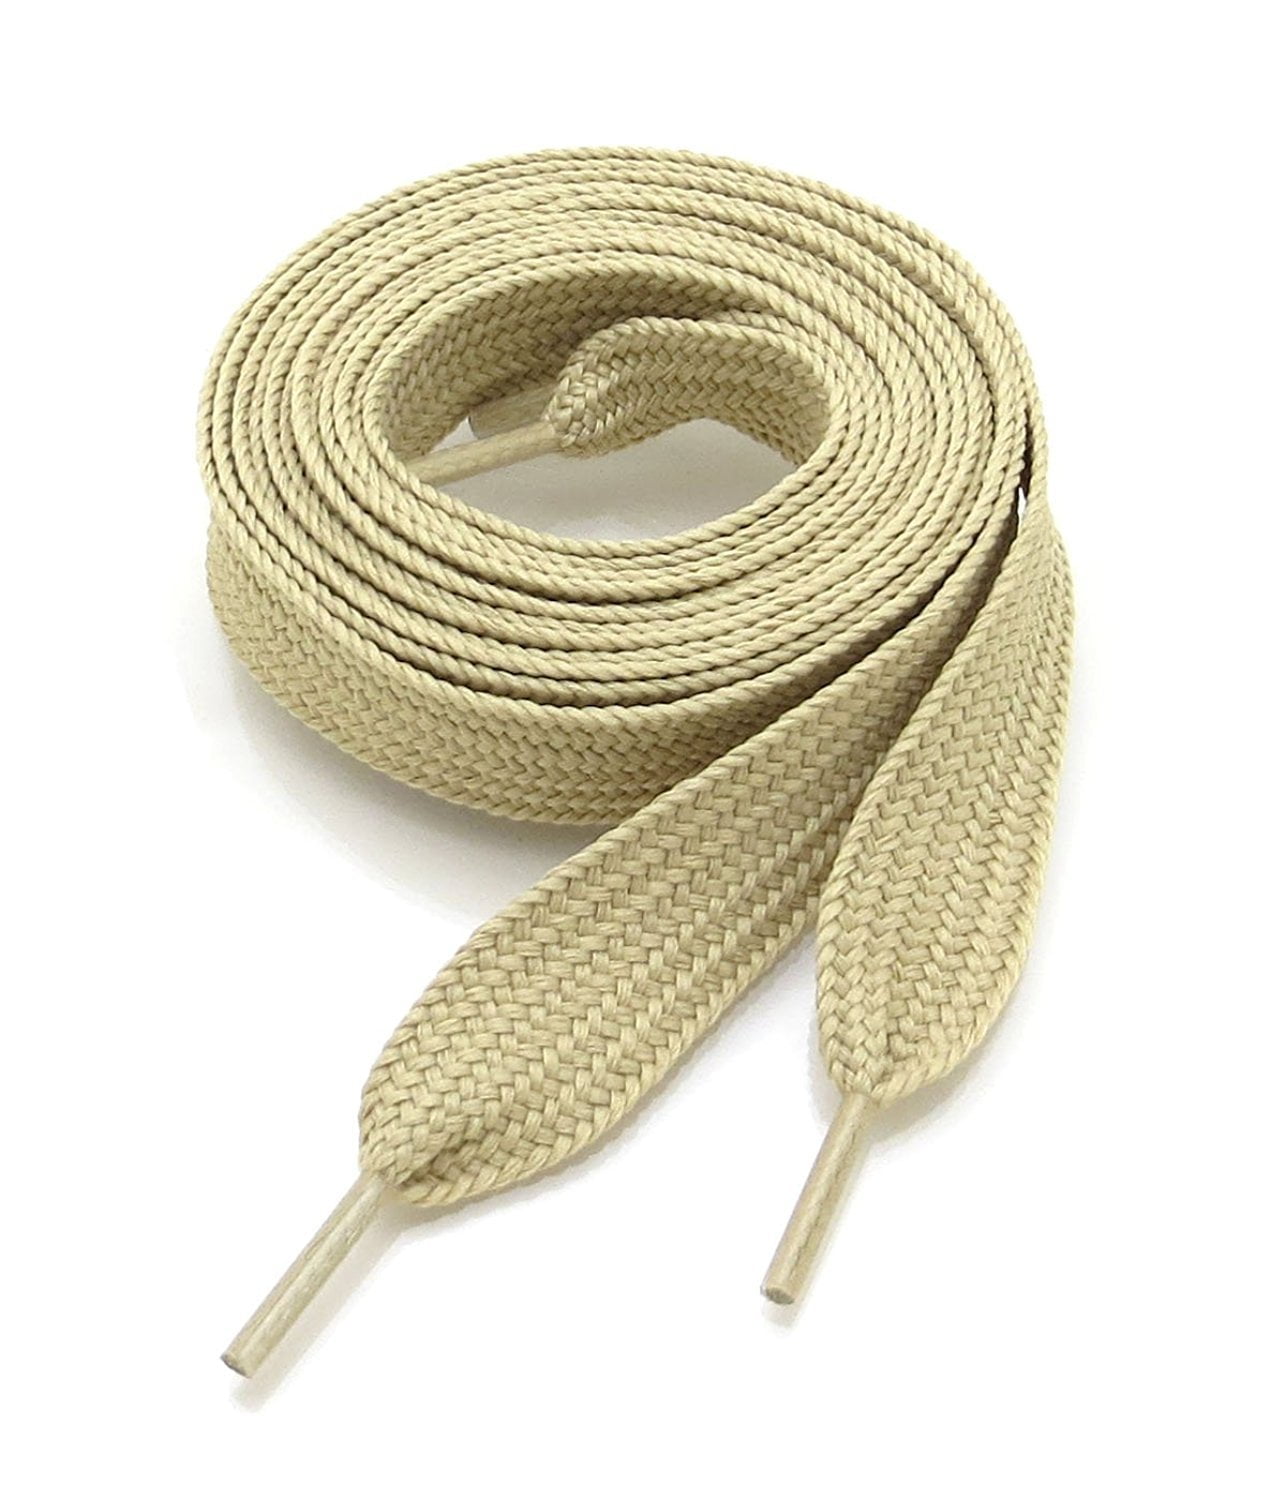 Oval Sneakers Shoelaces "Beige" 45" Athletic Shoelaces 1,2,4,6.12 Pairs 